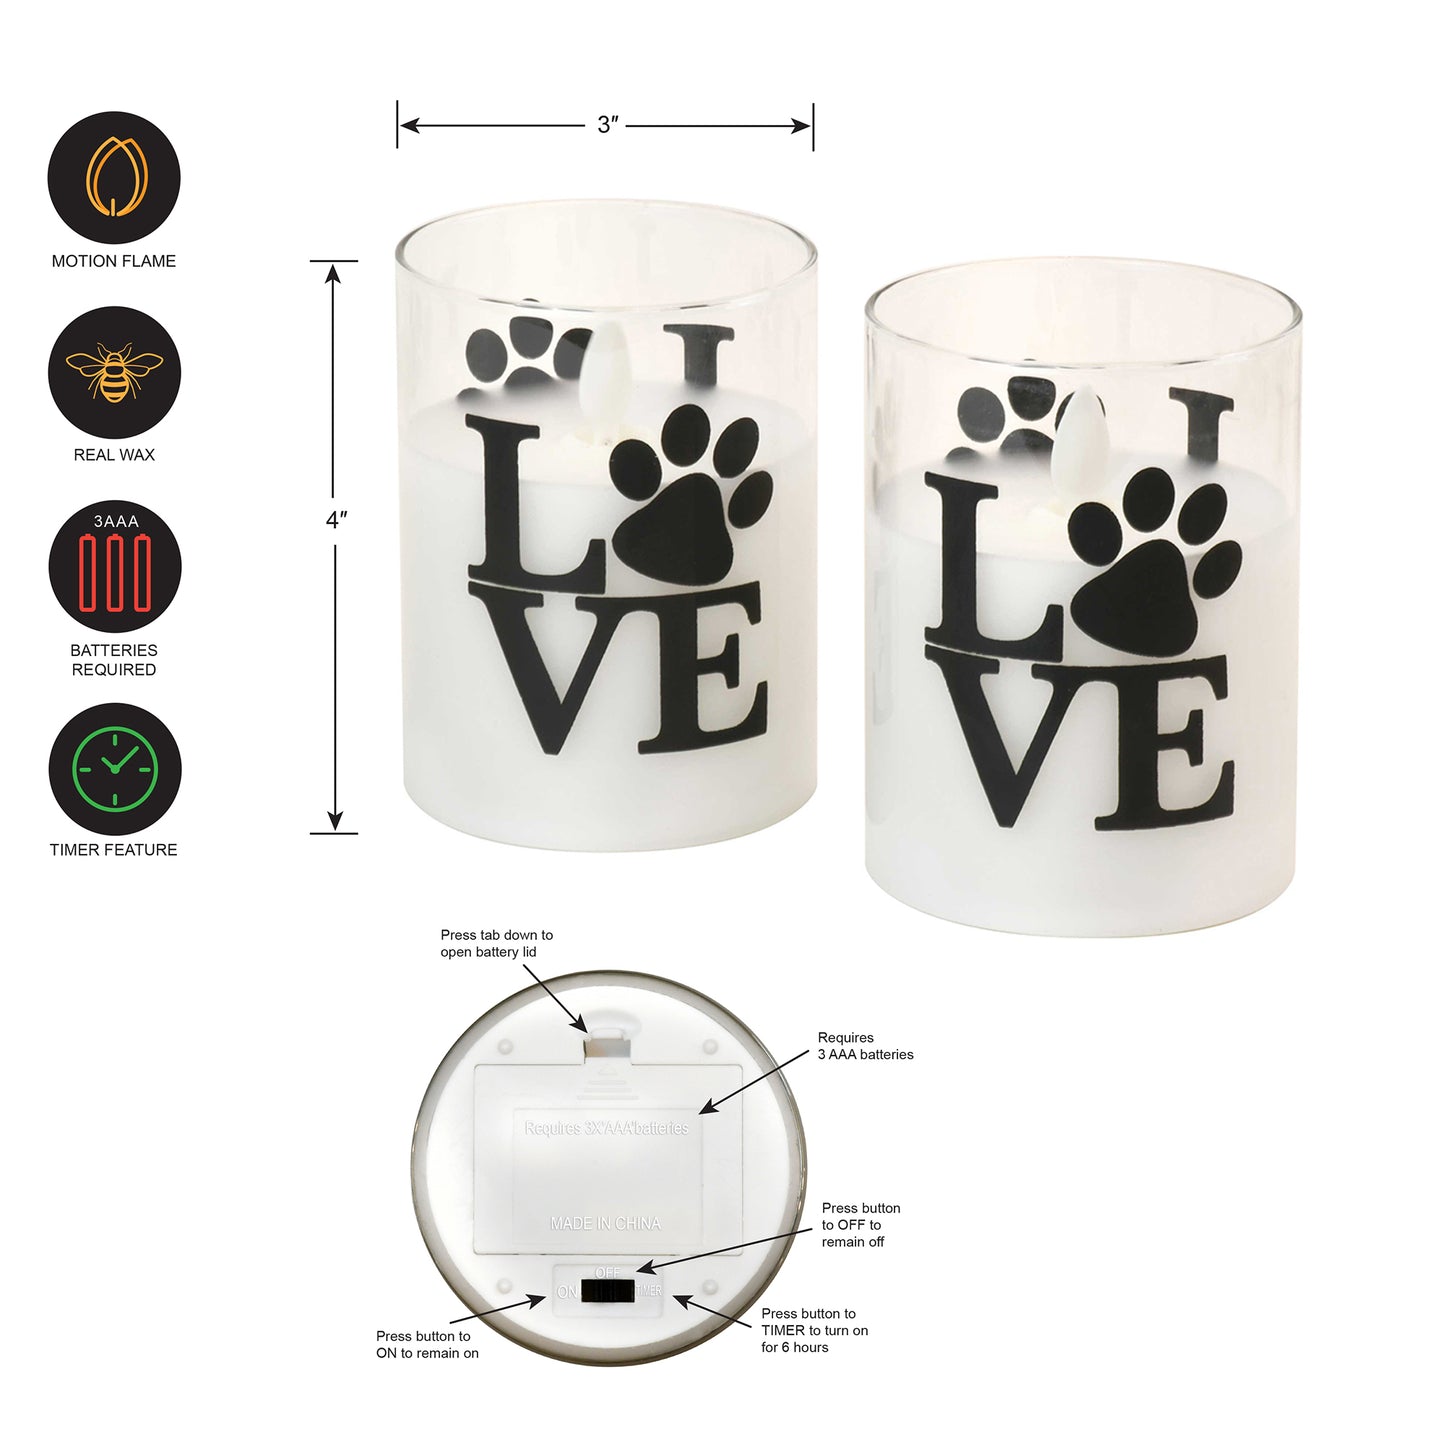 Battery Operated LED Glass Candles with Flickering Flame, Love Paw - Set of 2